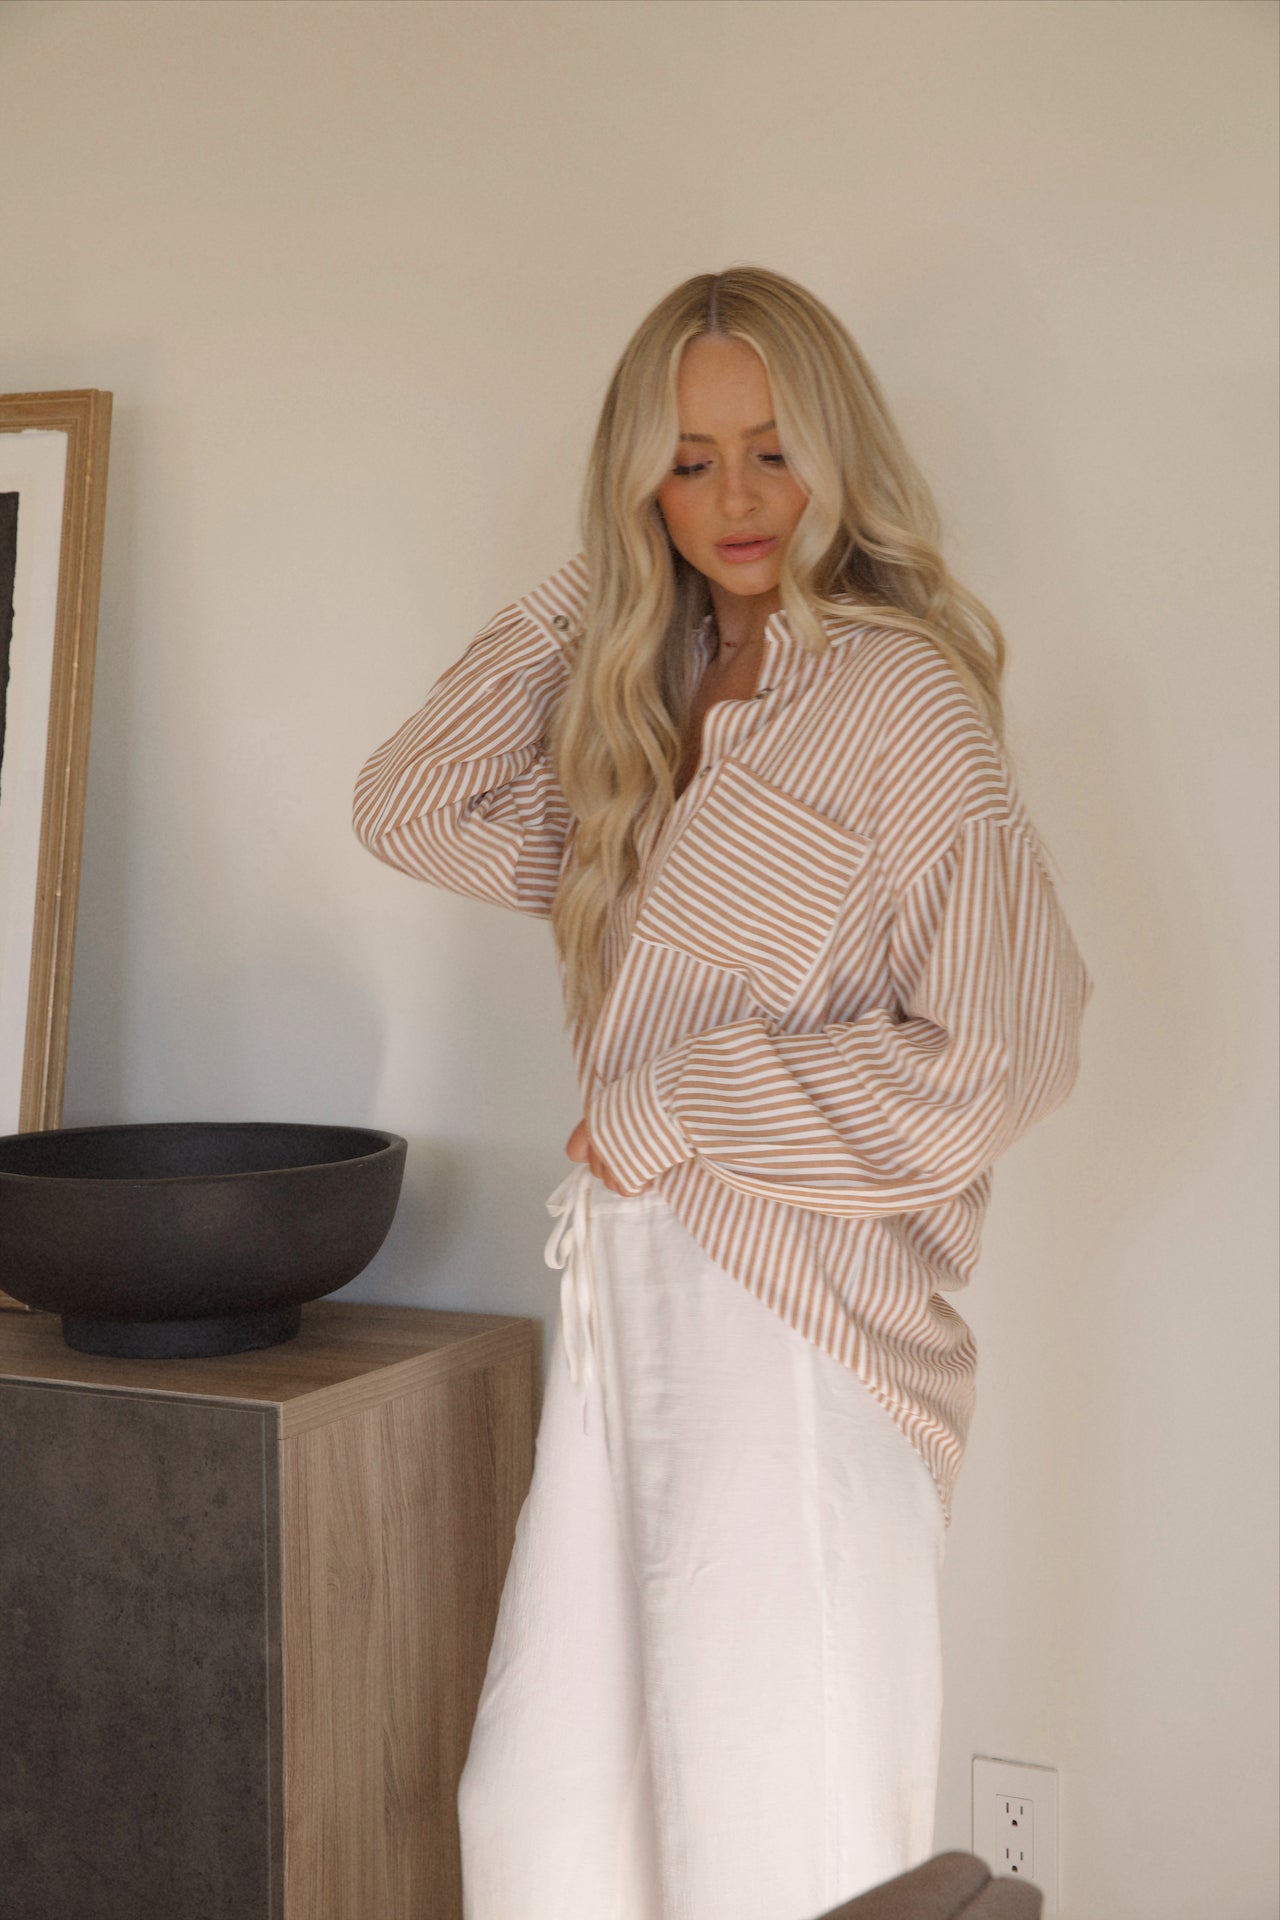 brown striped button up shirt for women